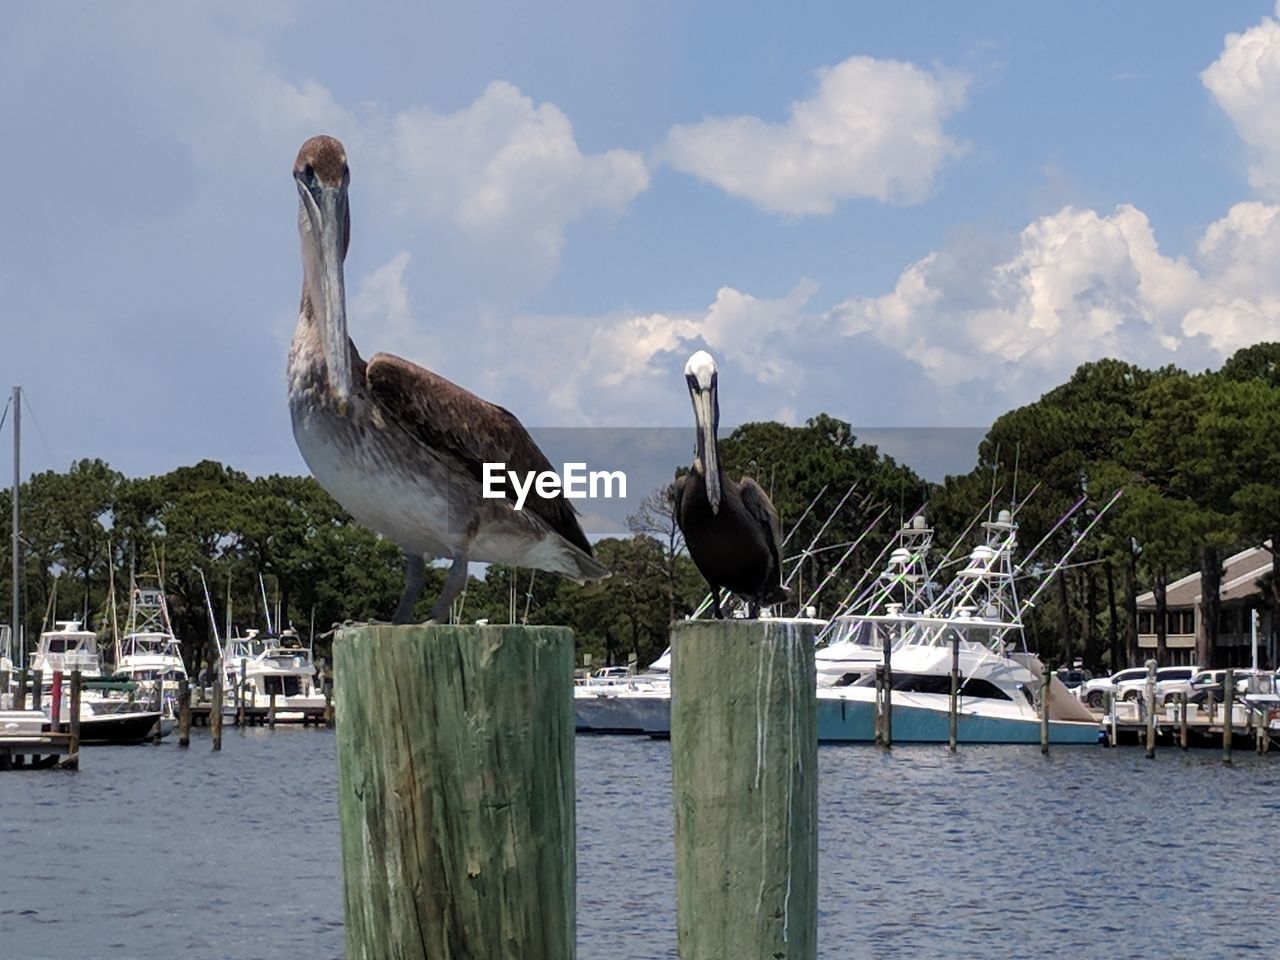 Two pelicans posing for a picture